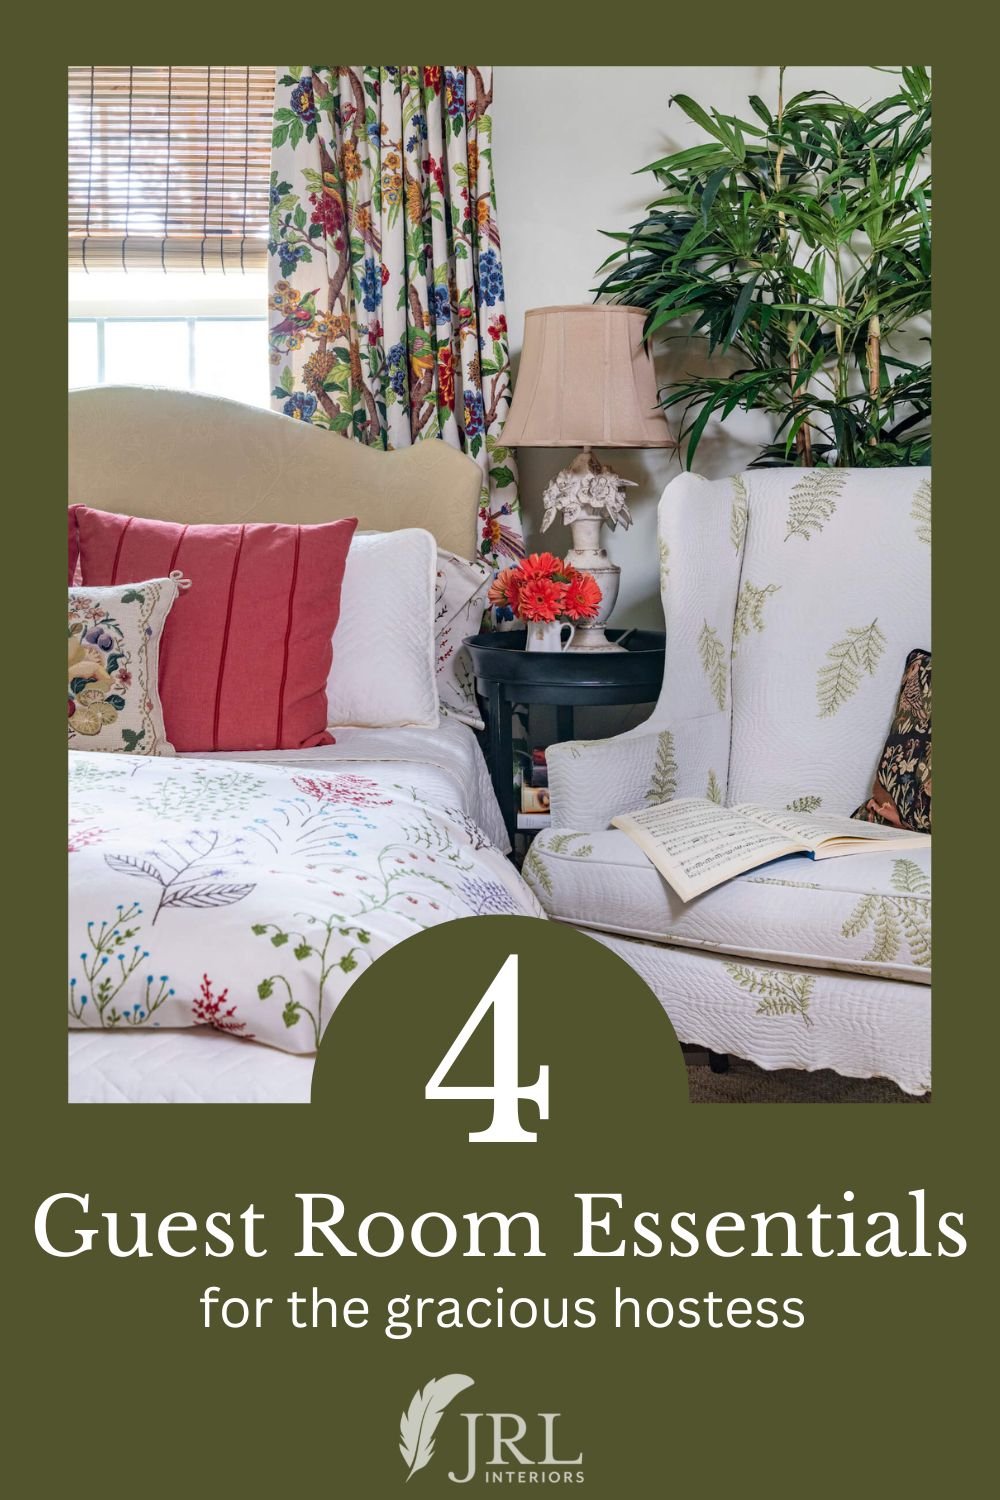 22 Guest Room Essentials - The secret to is easier than you think!